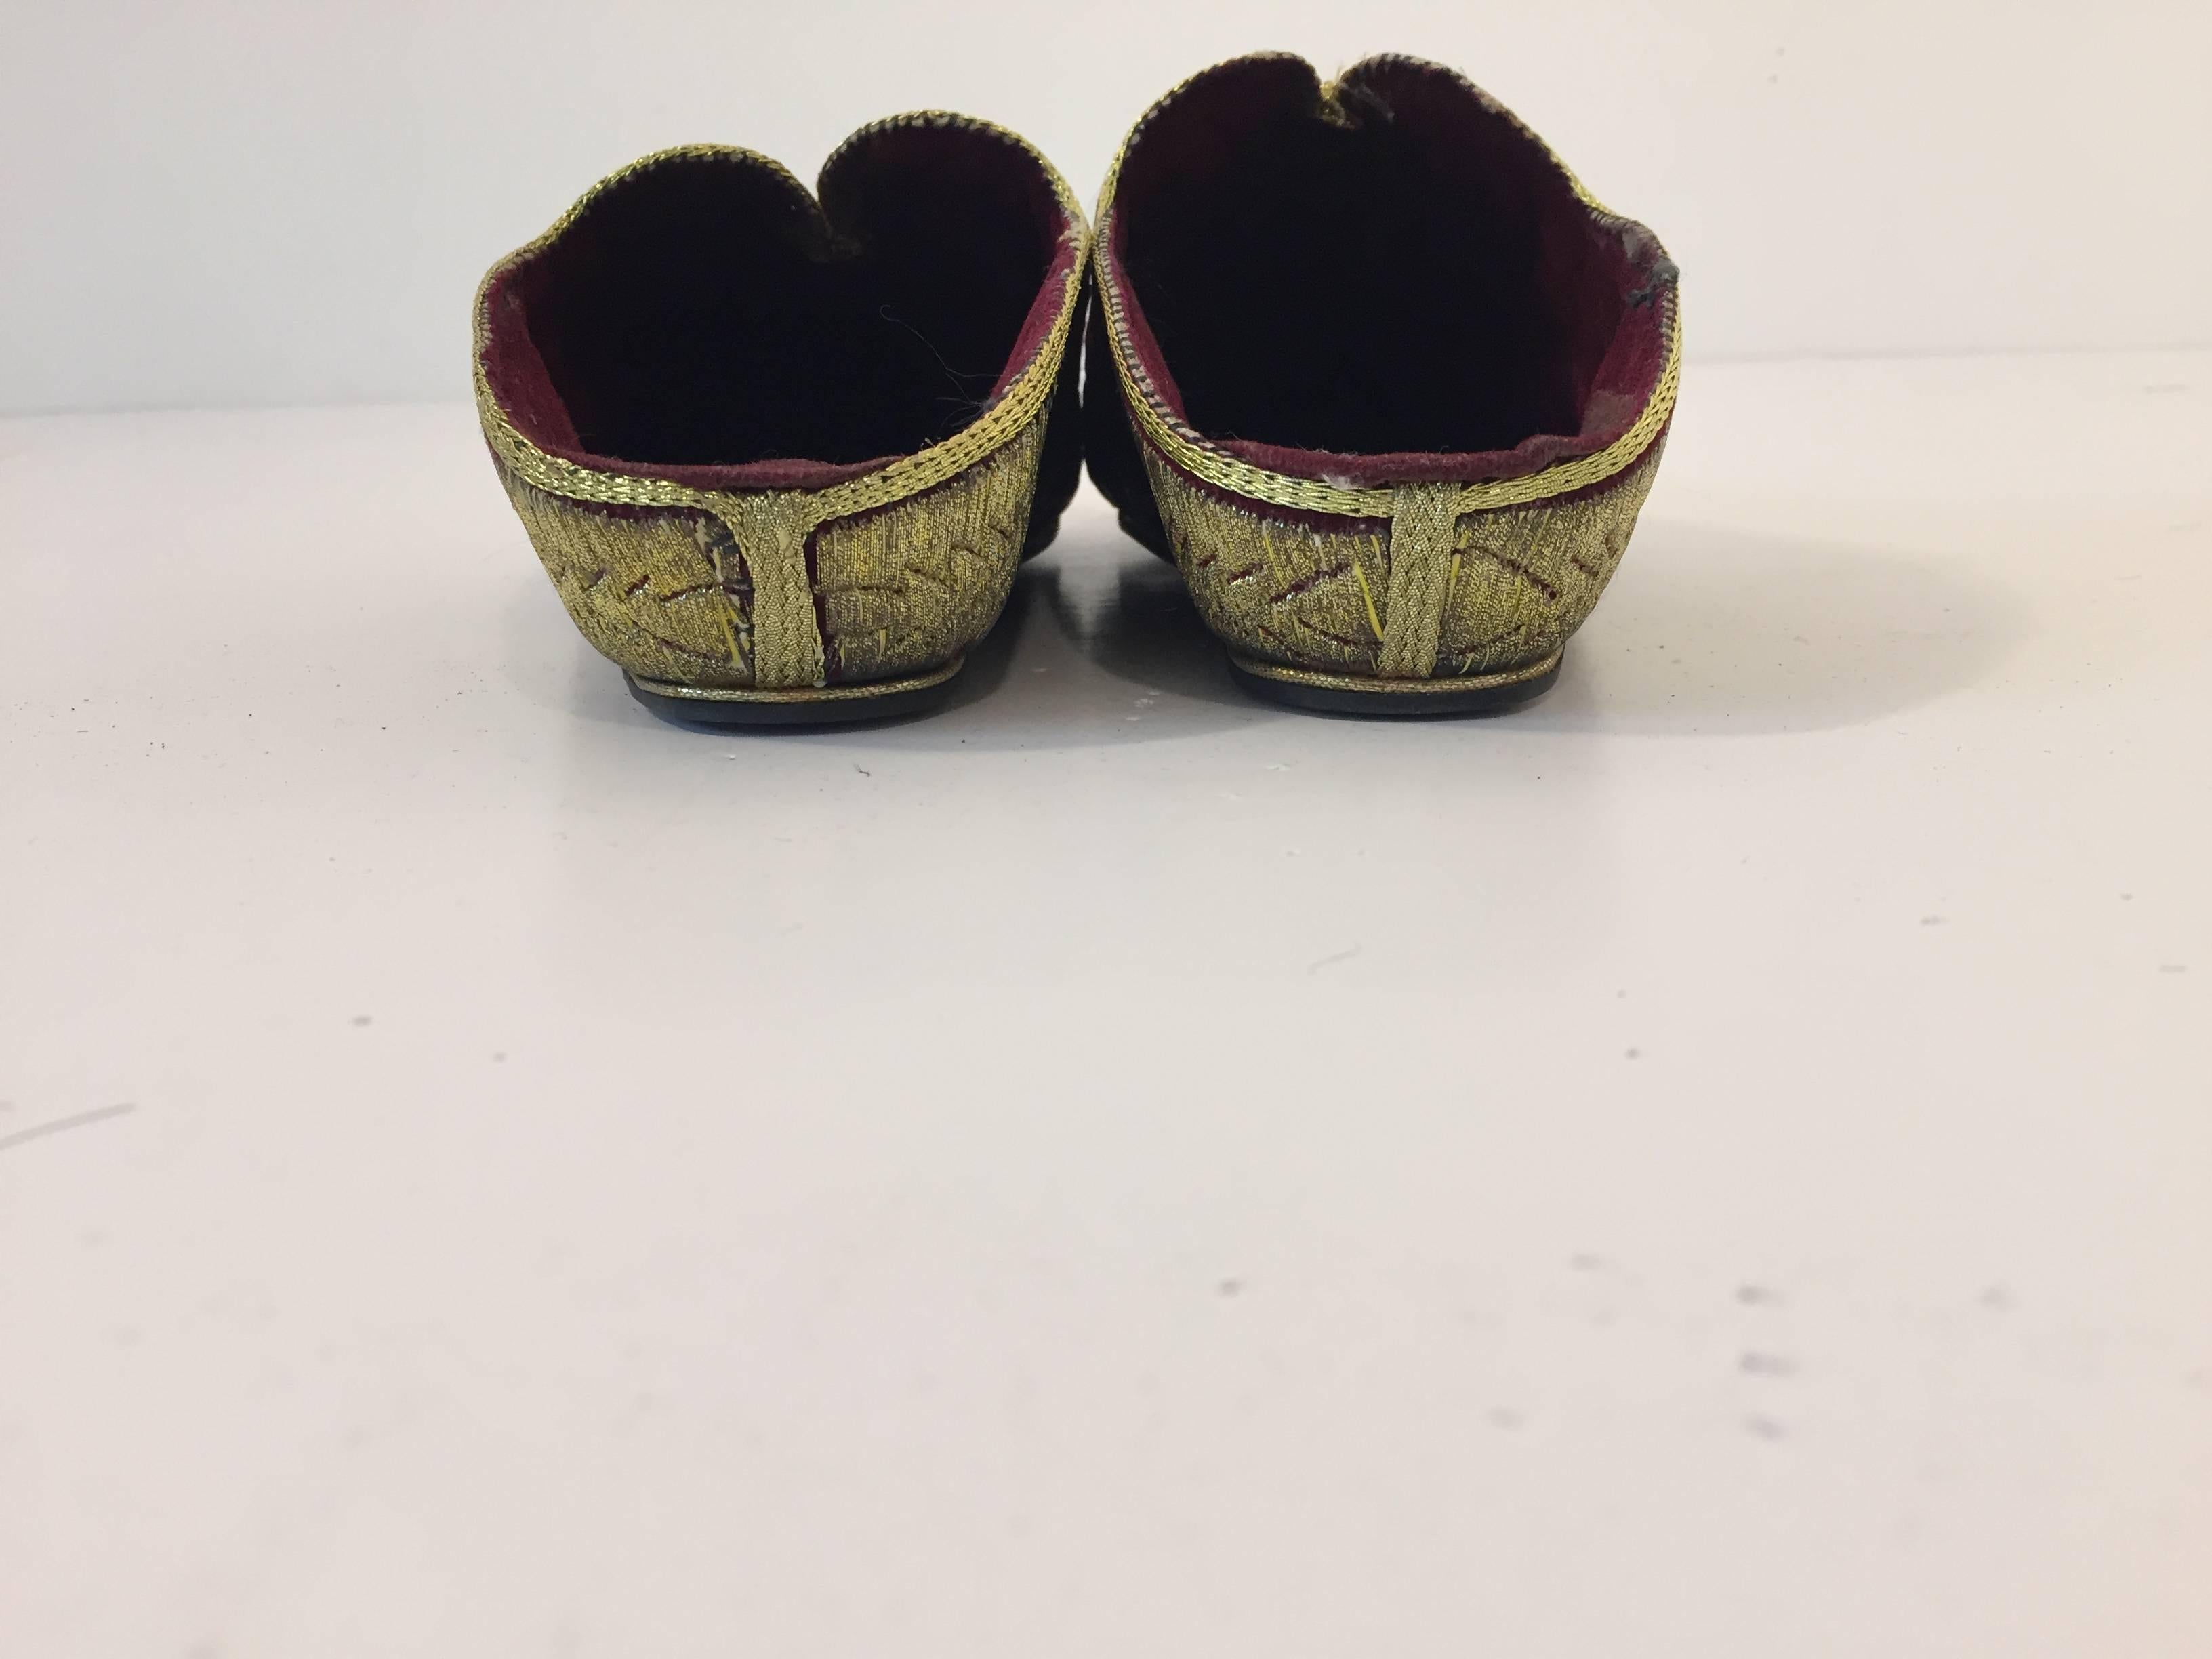 Moroccan Velvet Embroidered with Gold Metallic Thread Slippers Shoes For Sale 1